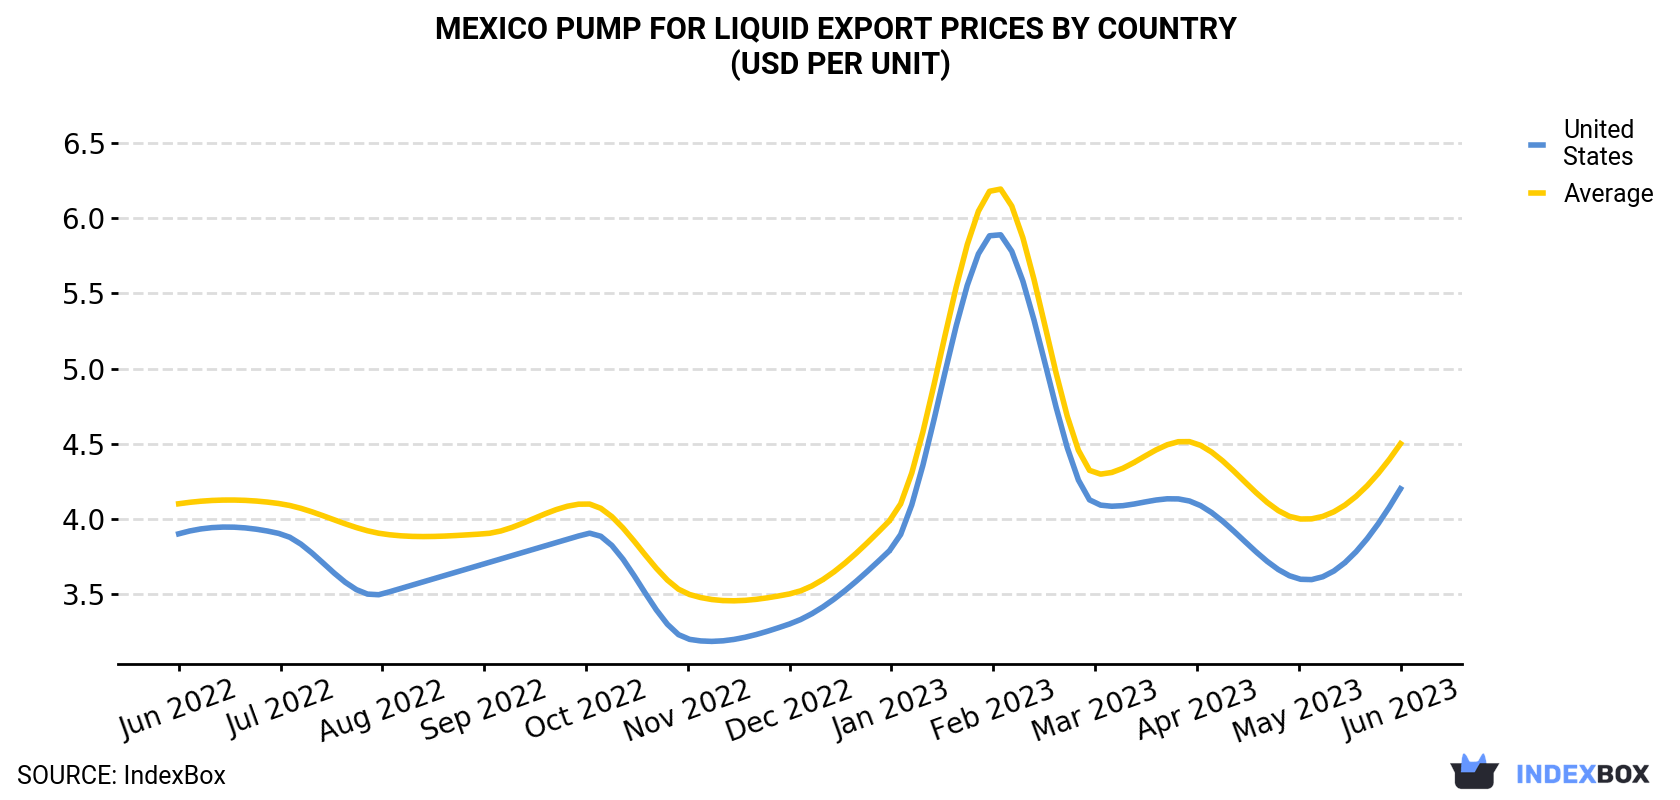 Mexico Pump For Liquid Export Prices By Country (USD Per Unit)